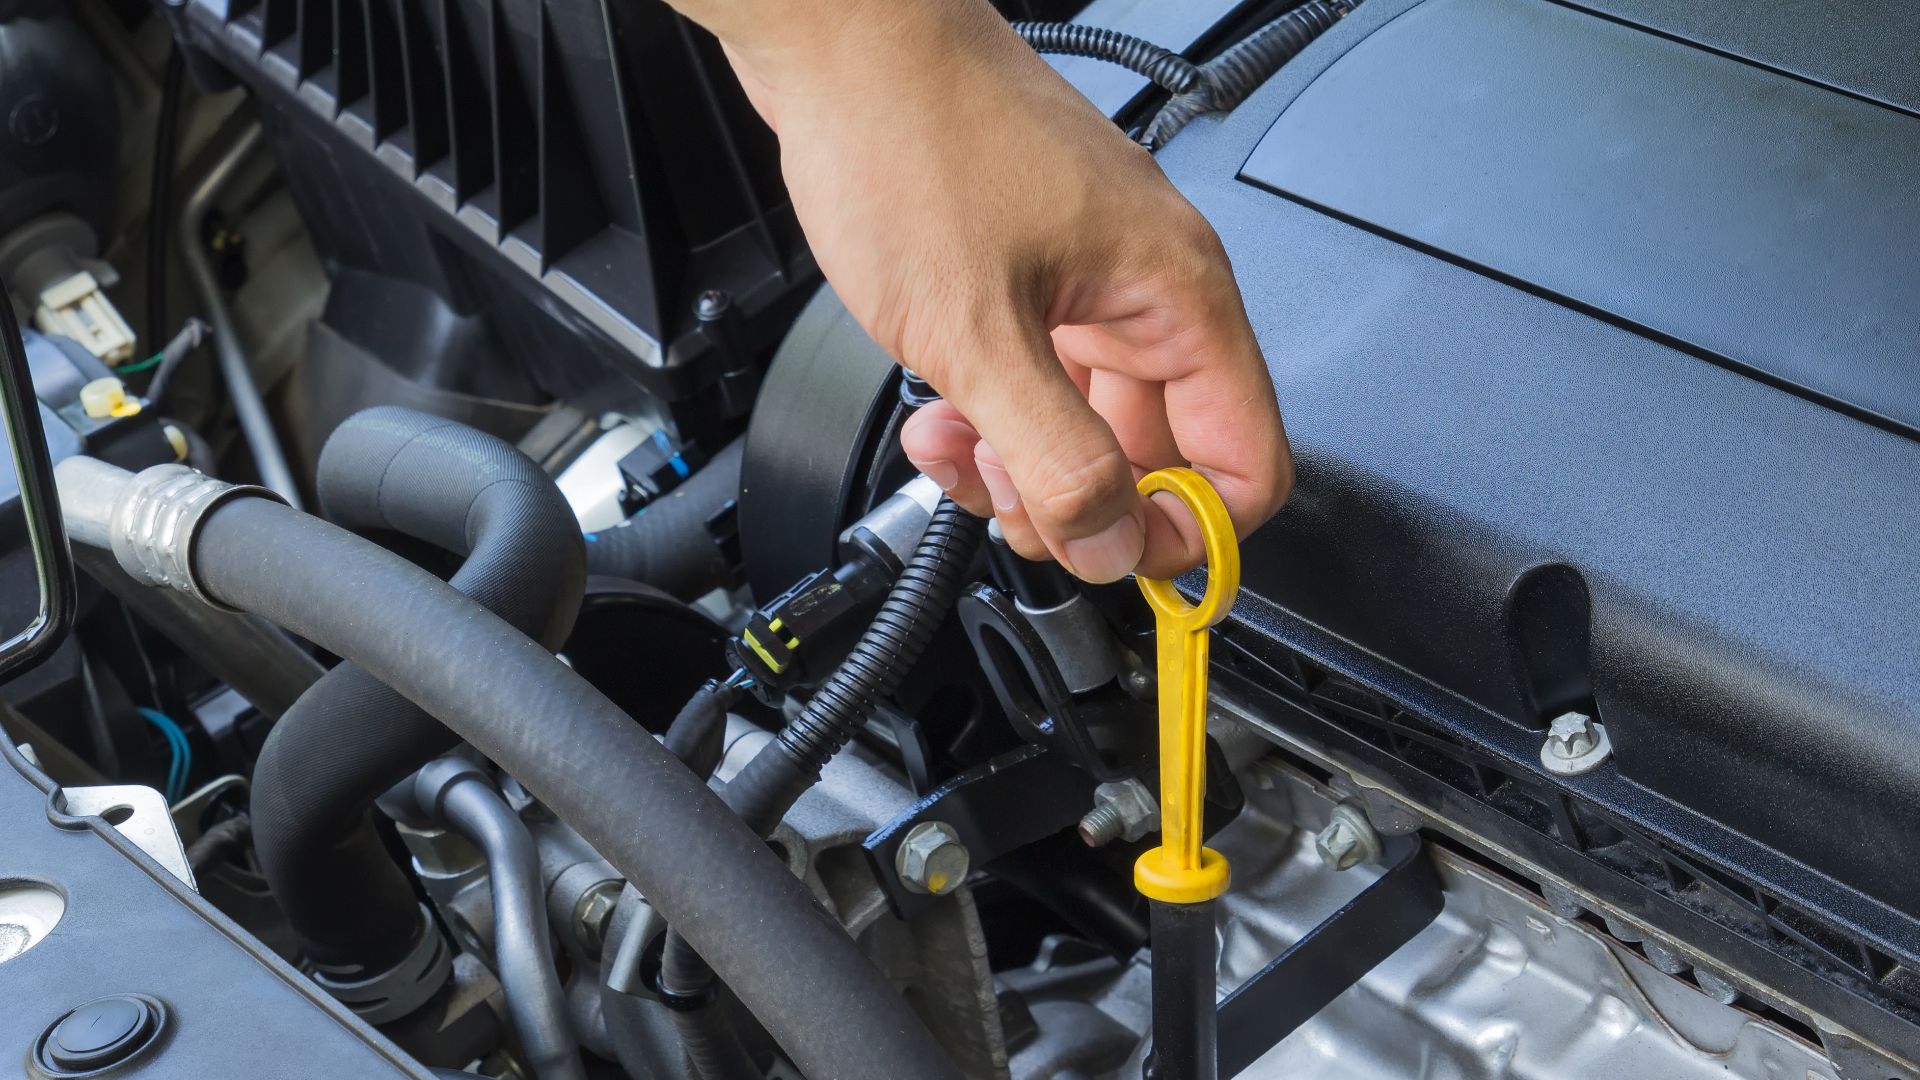 a person holding a wrench in front of a car engine.